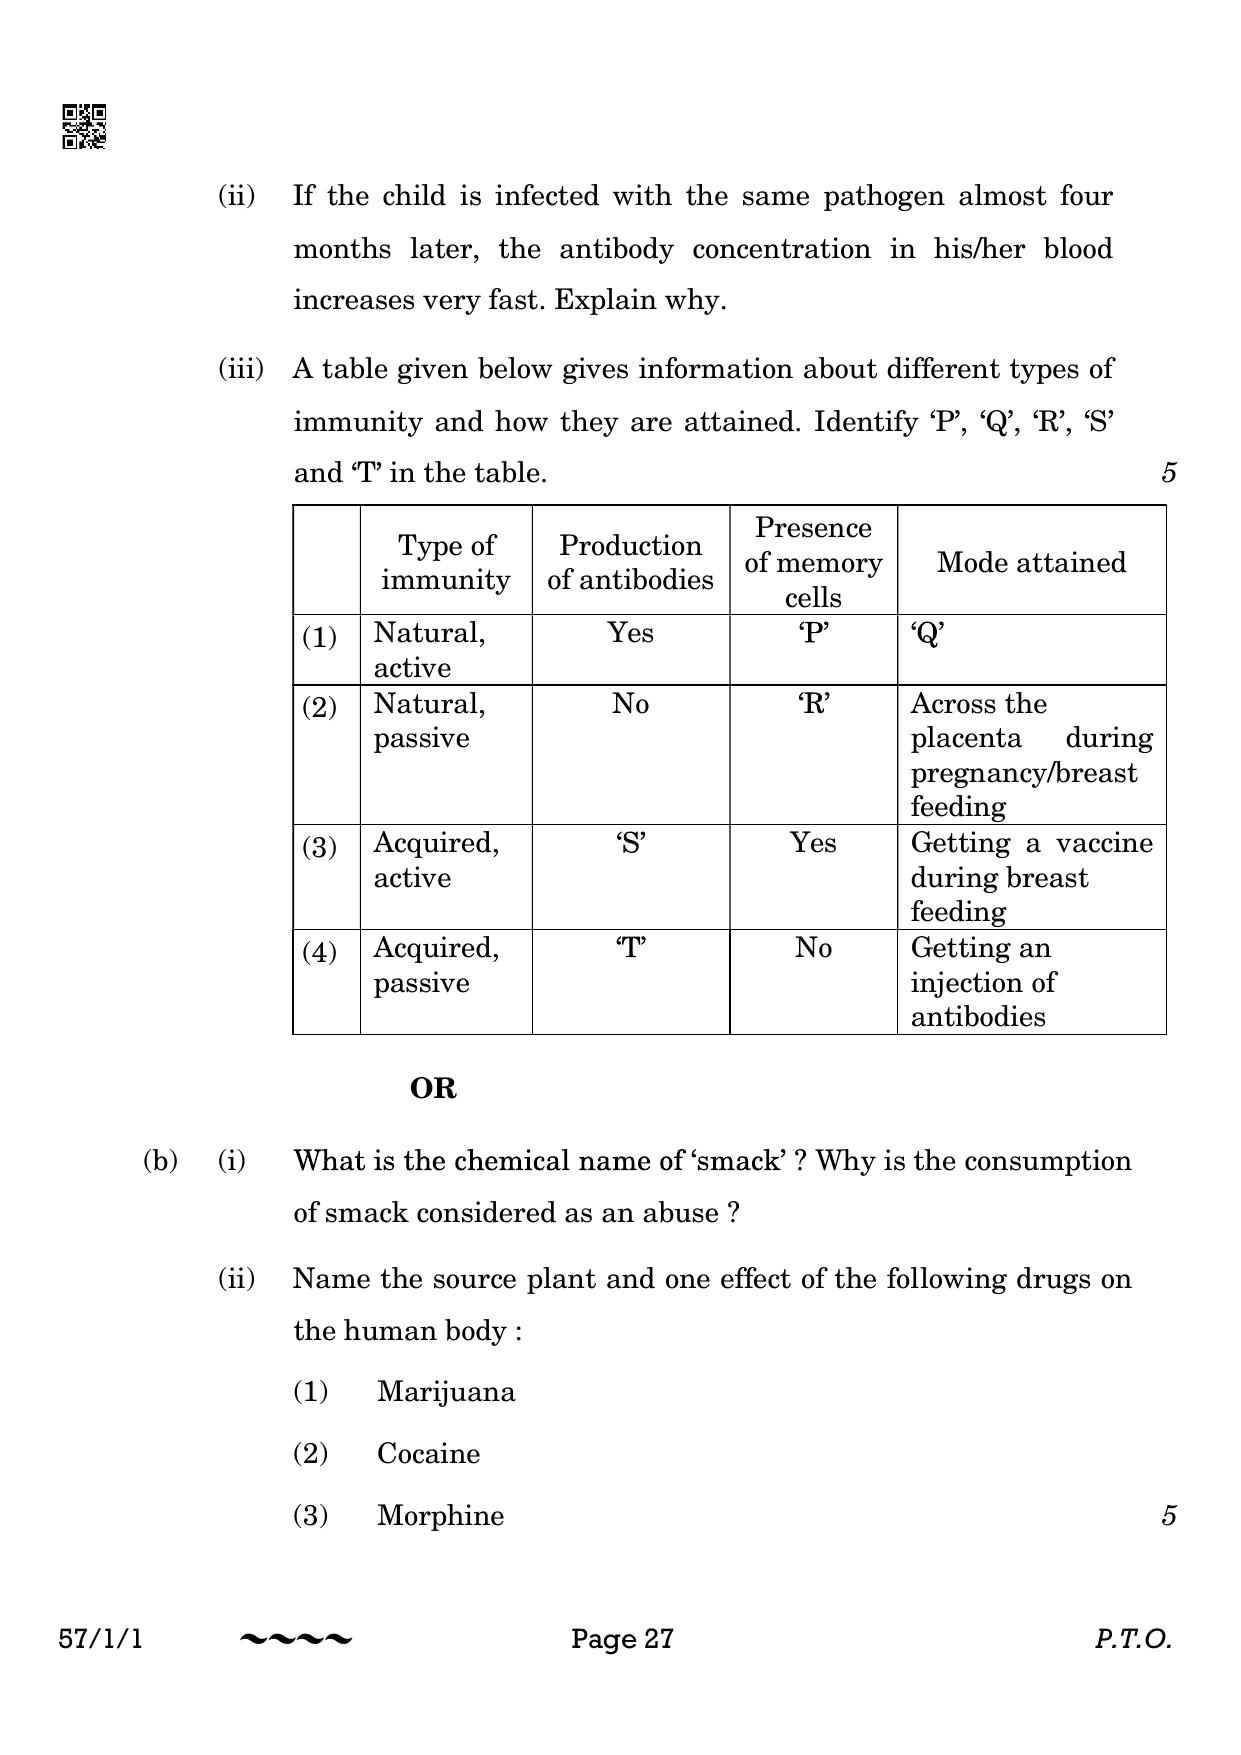 CBSE Class 12 57-1-1 Biology 2023 Question Paper - Page 27